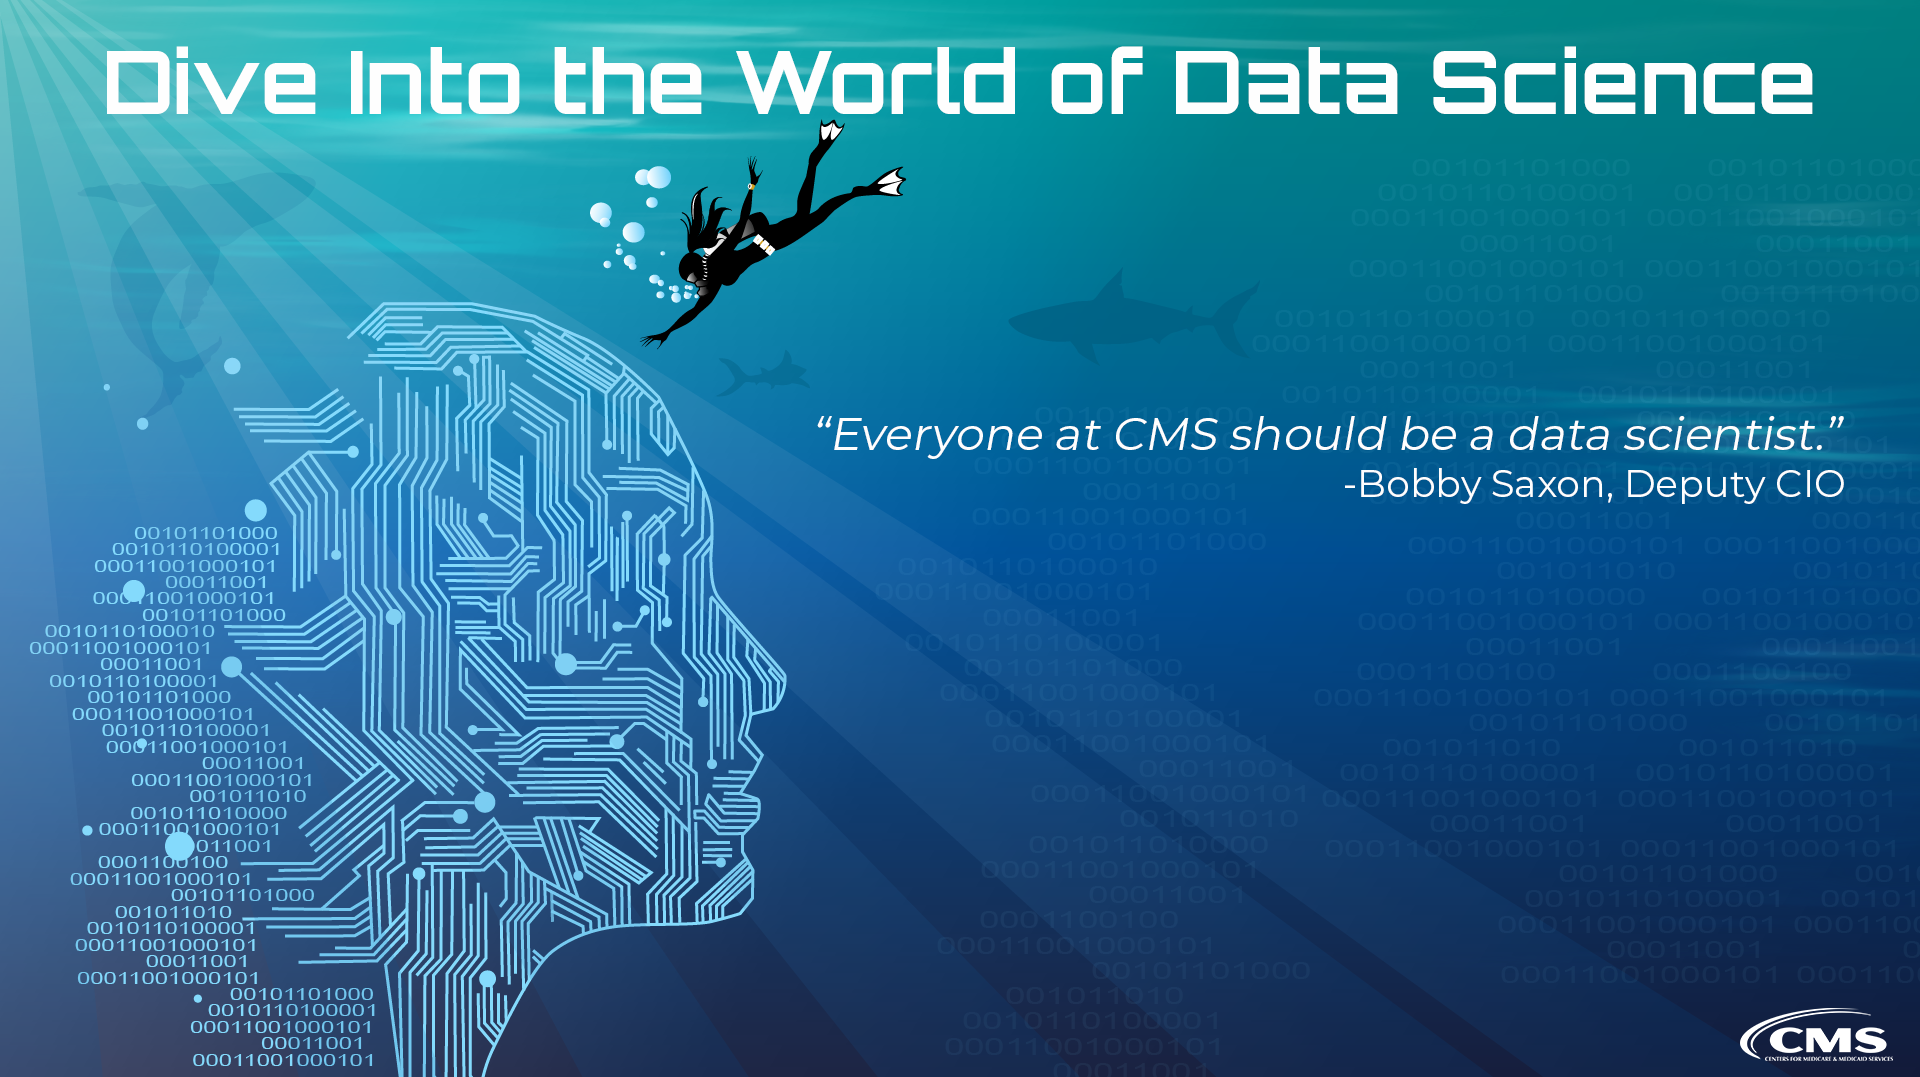 Undersea diver graphic with headline "Dive into the world of data science" and Bobby Saxon quote "Everyone at CMS should be a data scientist."